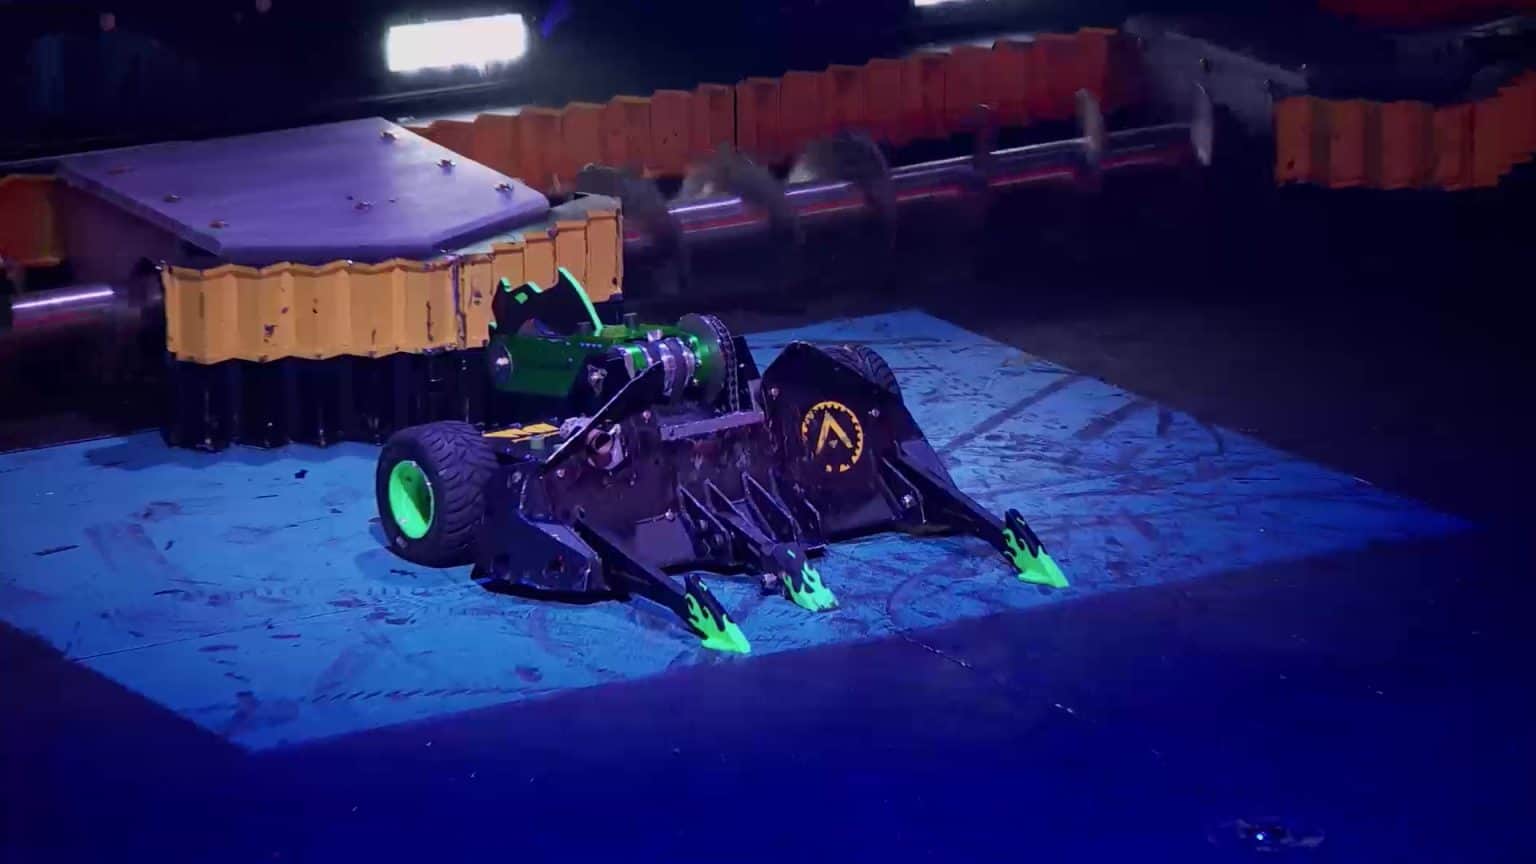 Battlebots Season 12 Episode 1 Release Date, Preview & Streaming Guide